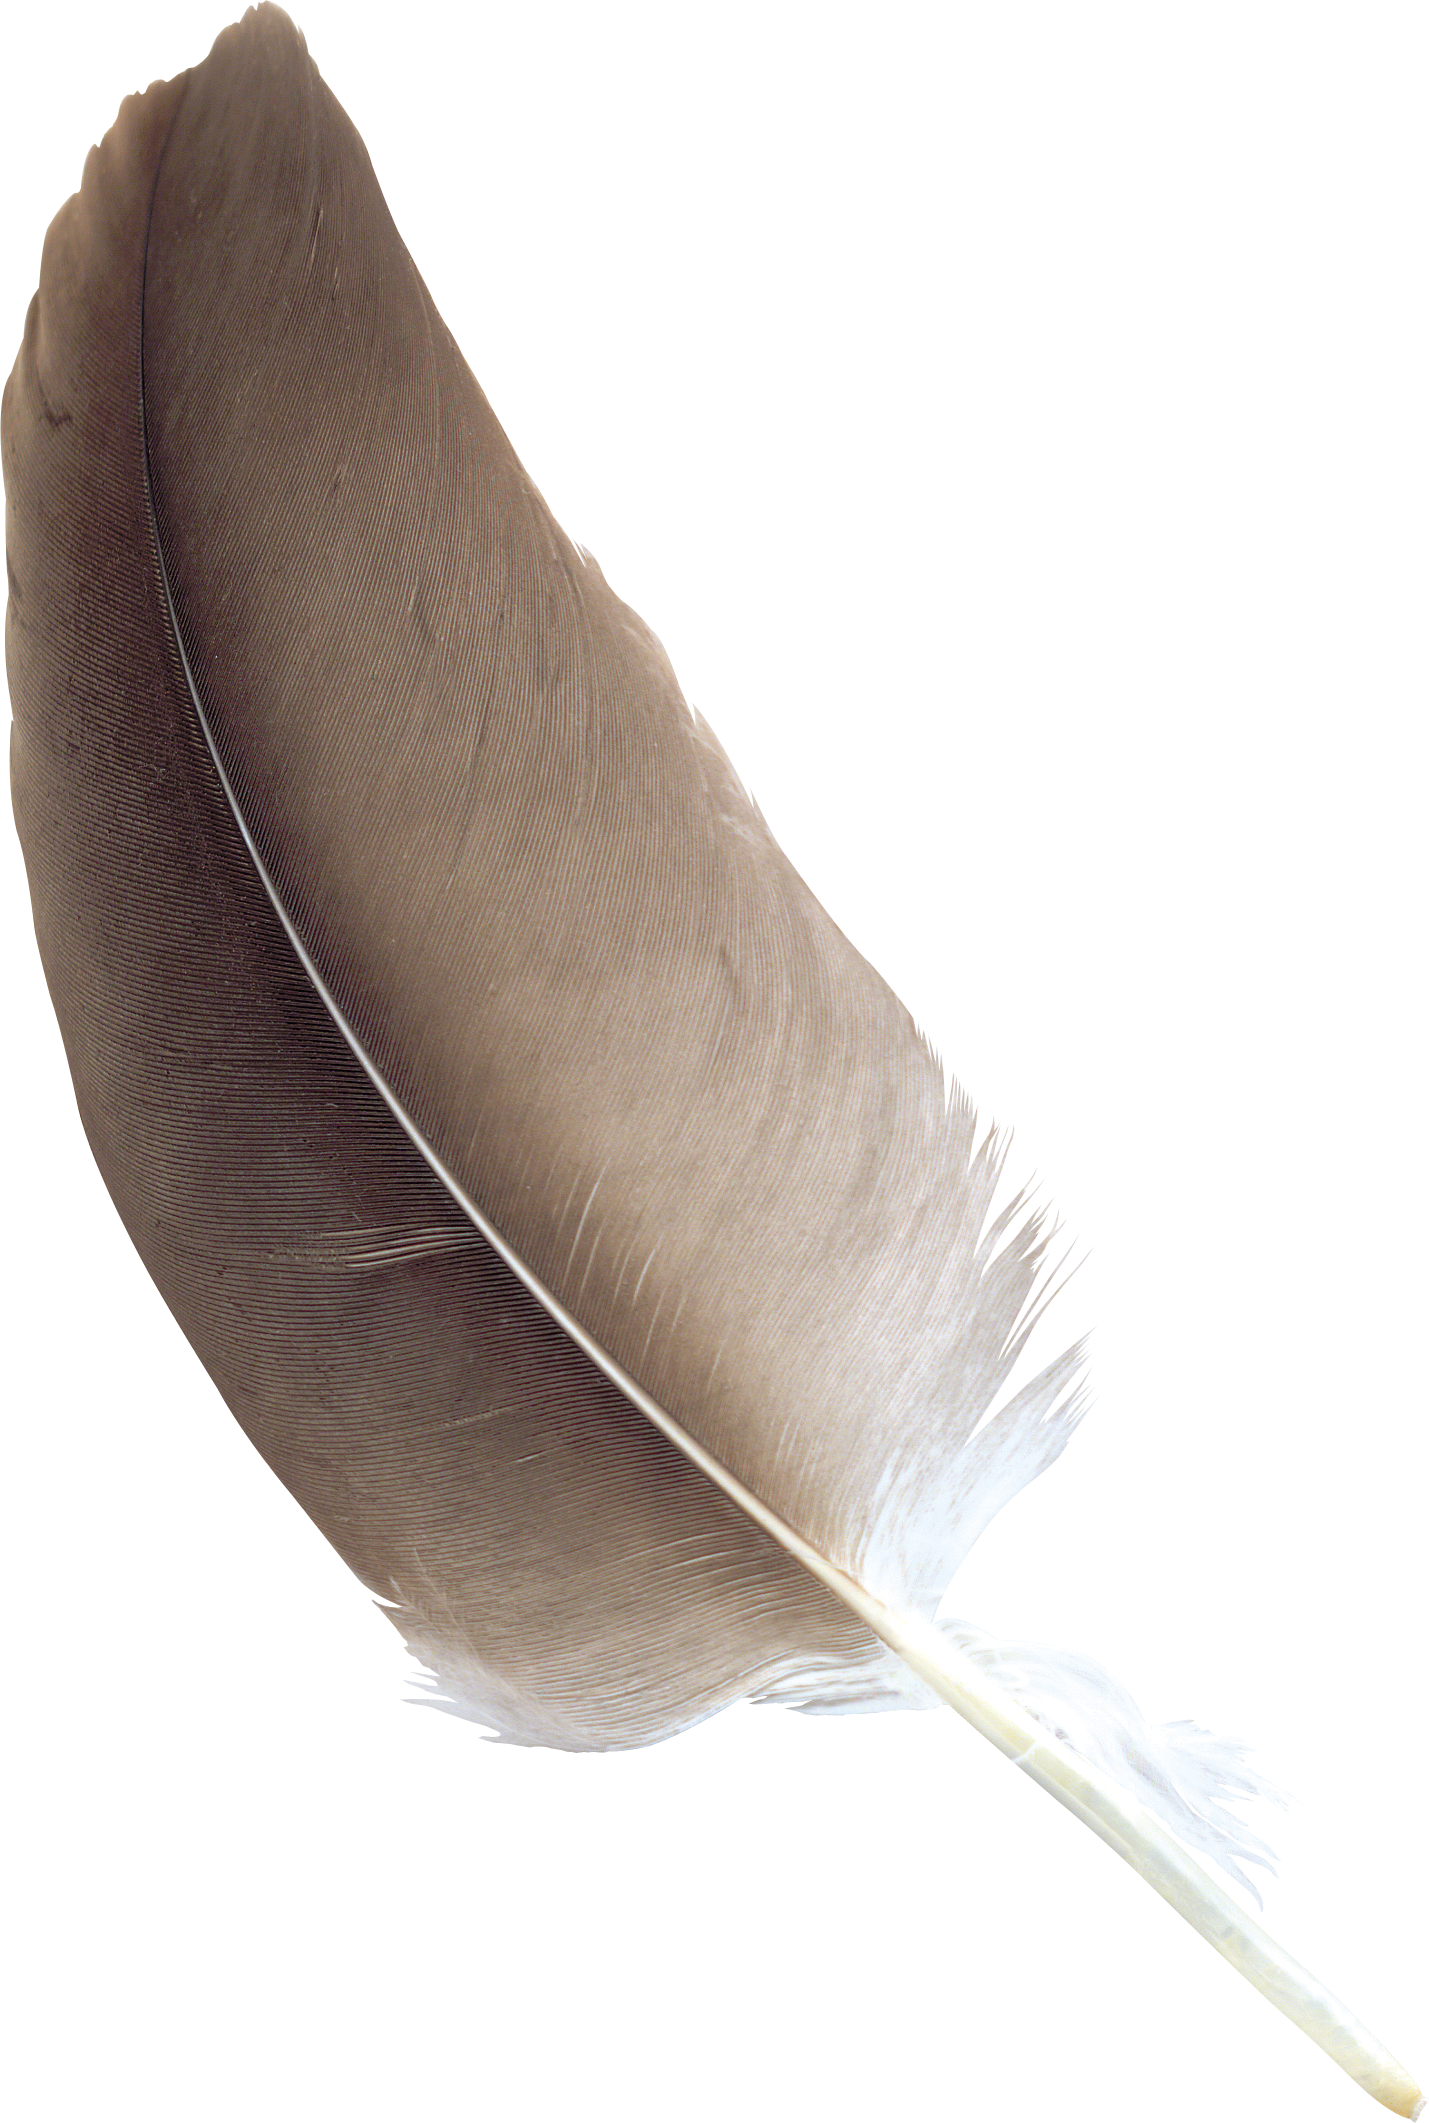 Plume Fond PNG Image